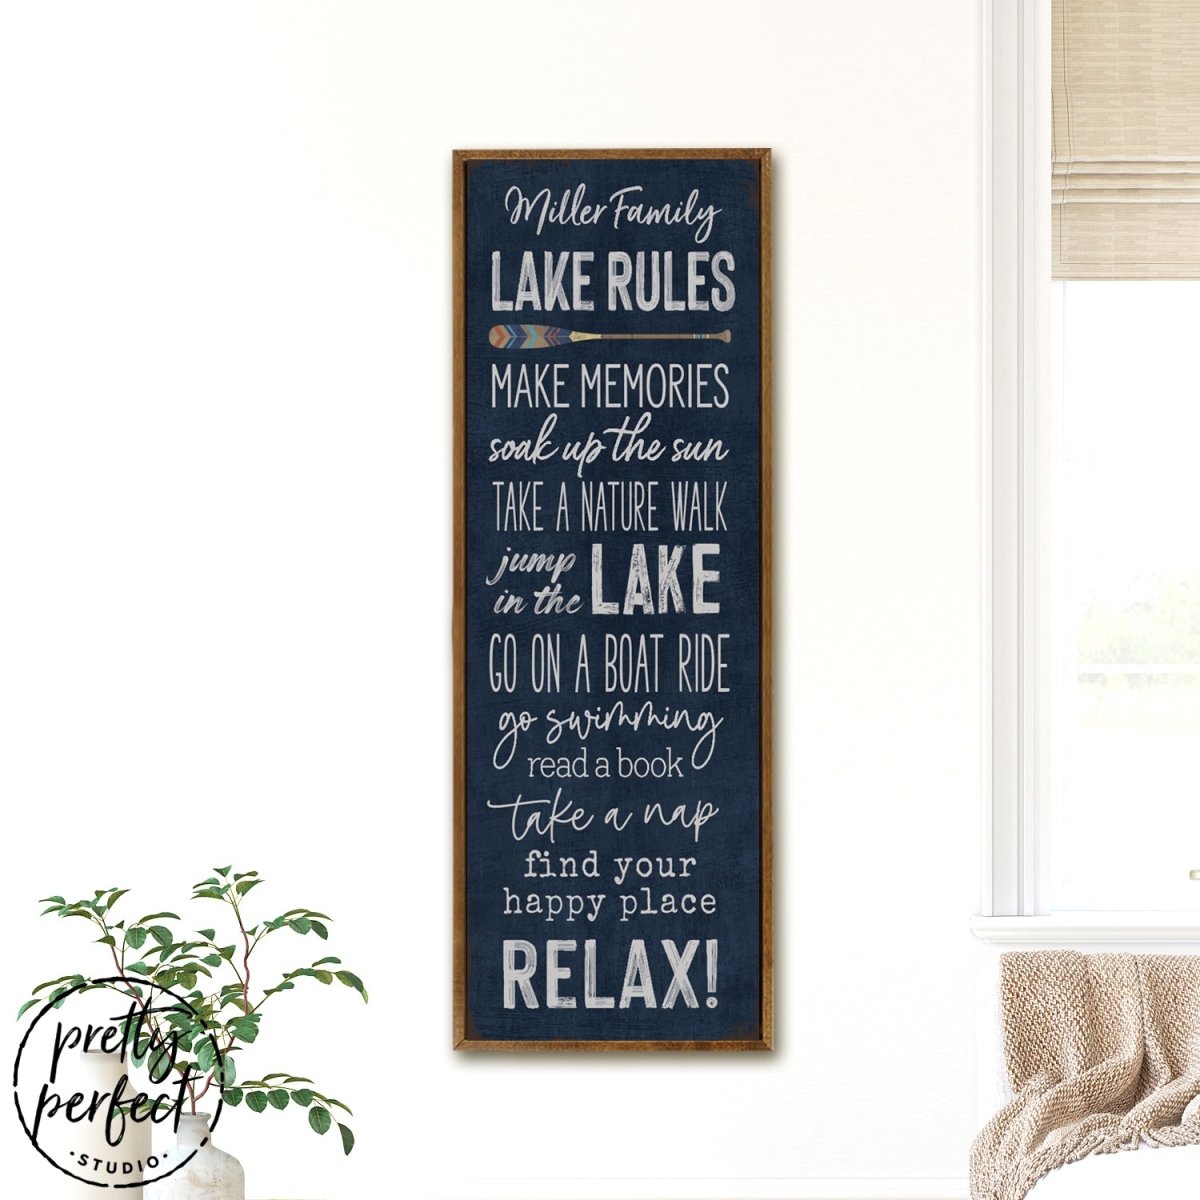 Lake House Rules Sign Hanging In Vacation Home - Pretty Perfect Studio